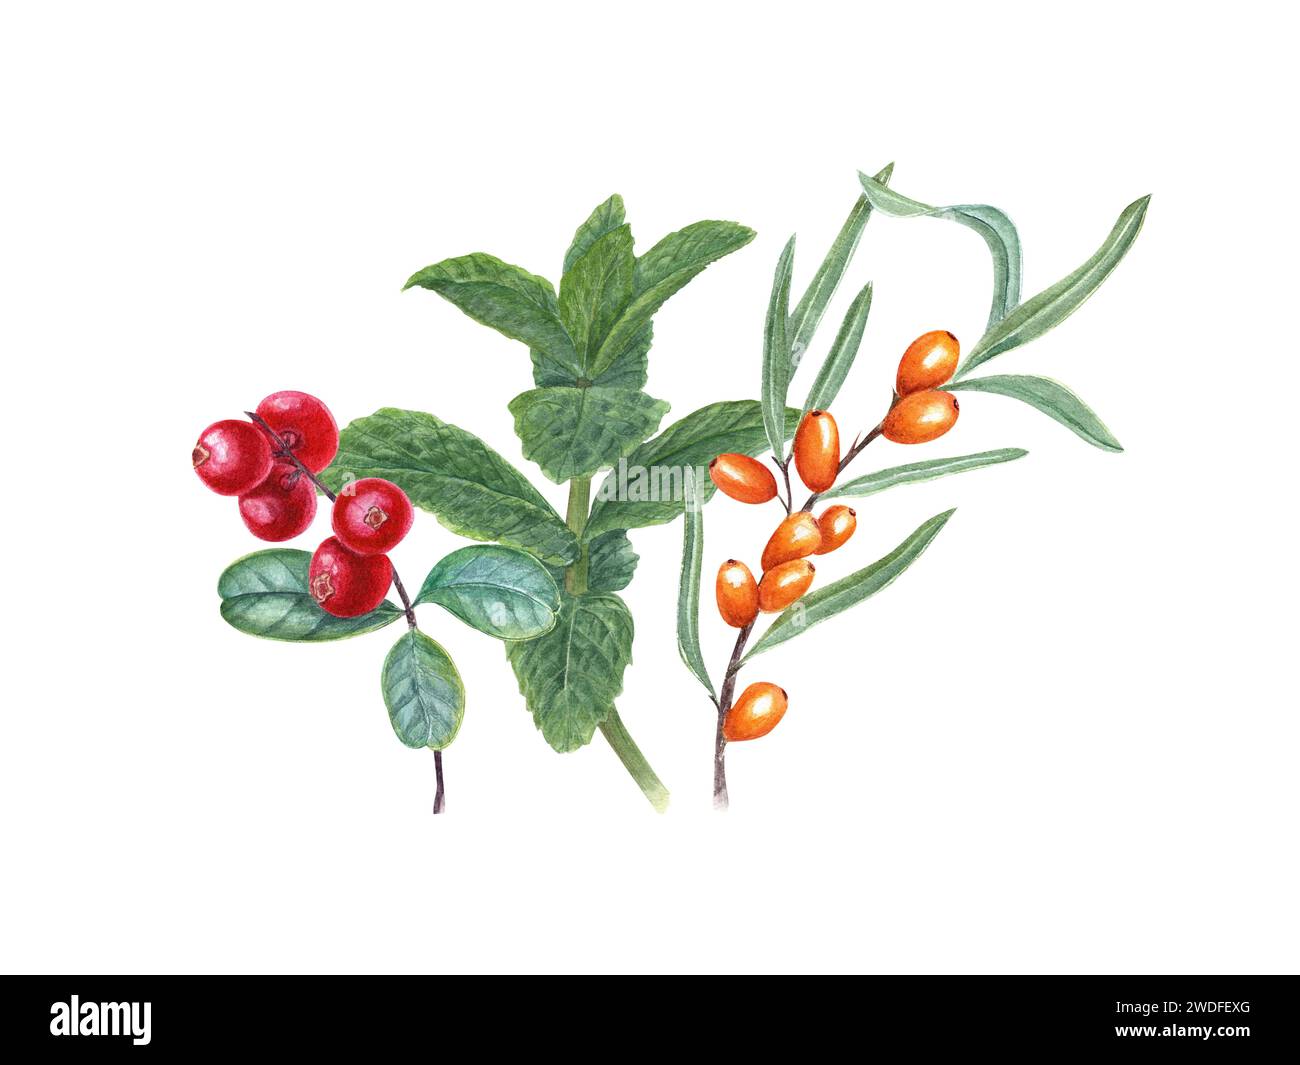 Composition with sea buckthorn berries, lingonberry, mint plant. Branches of berries and aromatic herb. Watercolor illustration for label, logo Stock Photo